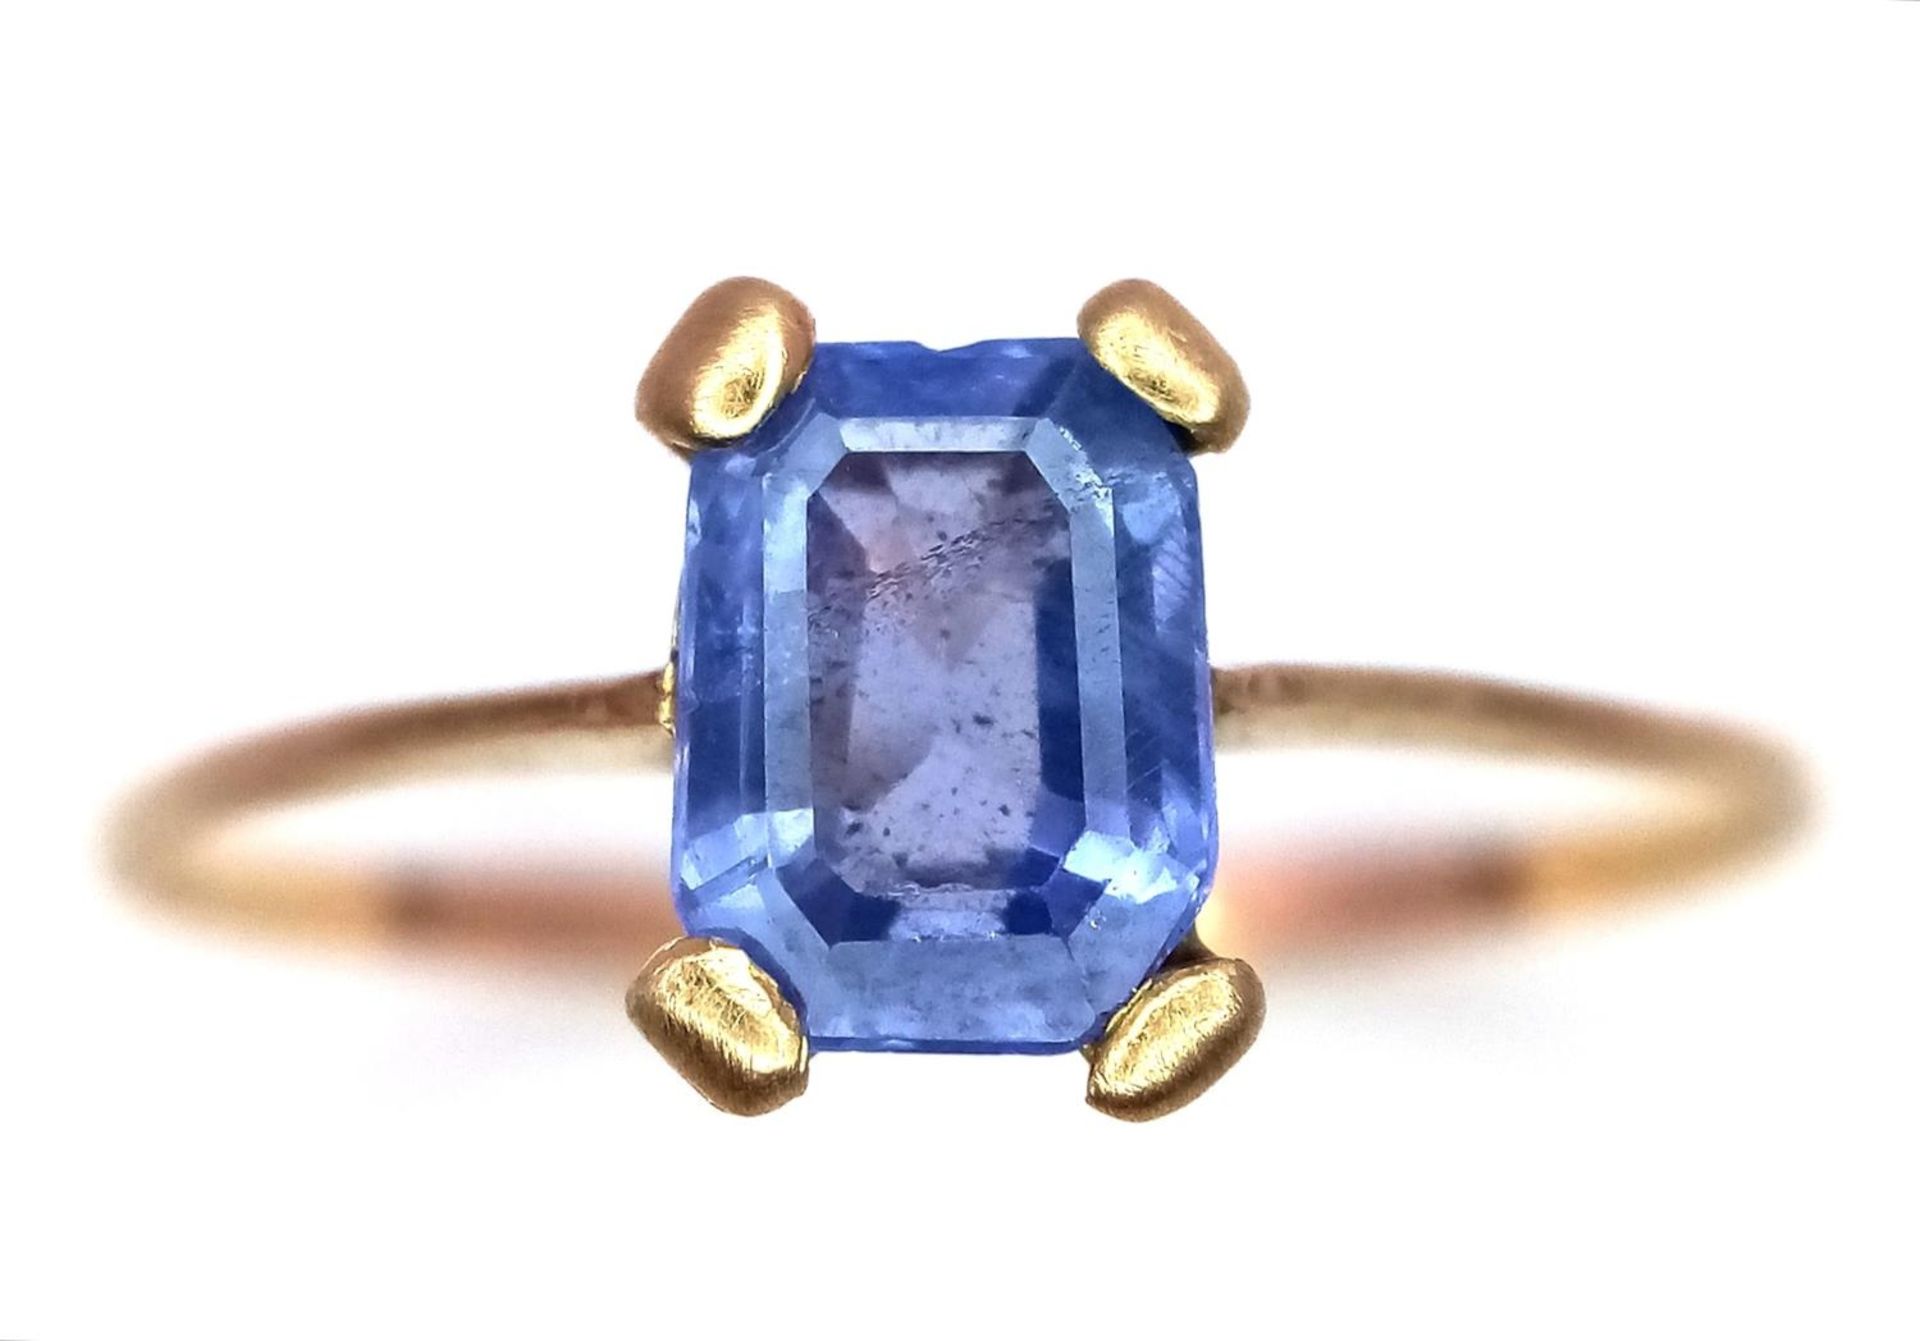 A 9K Yellow Gold 1ct Sapphire Solitaire Ring. Size U, 1.23g total weight.